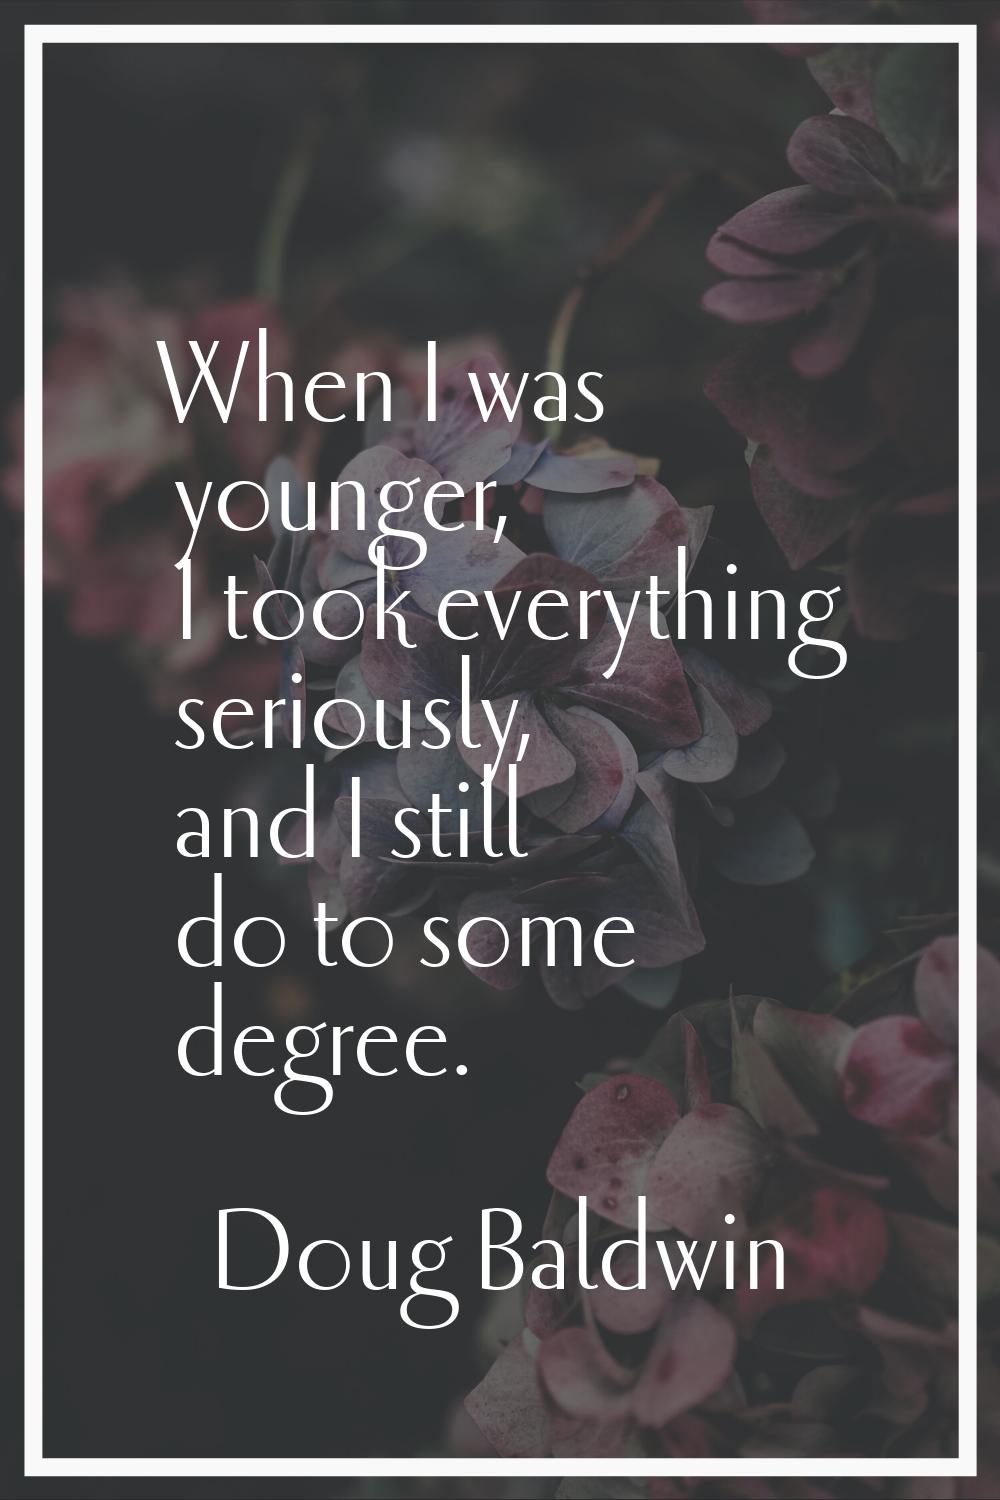 When I was younger, I took everything seriously, and I still do to some degree.